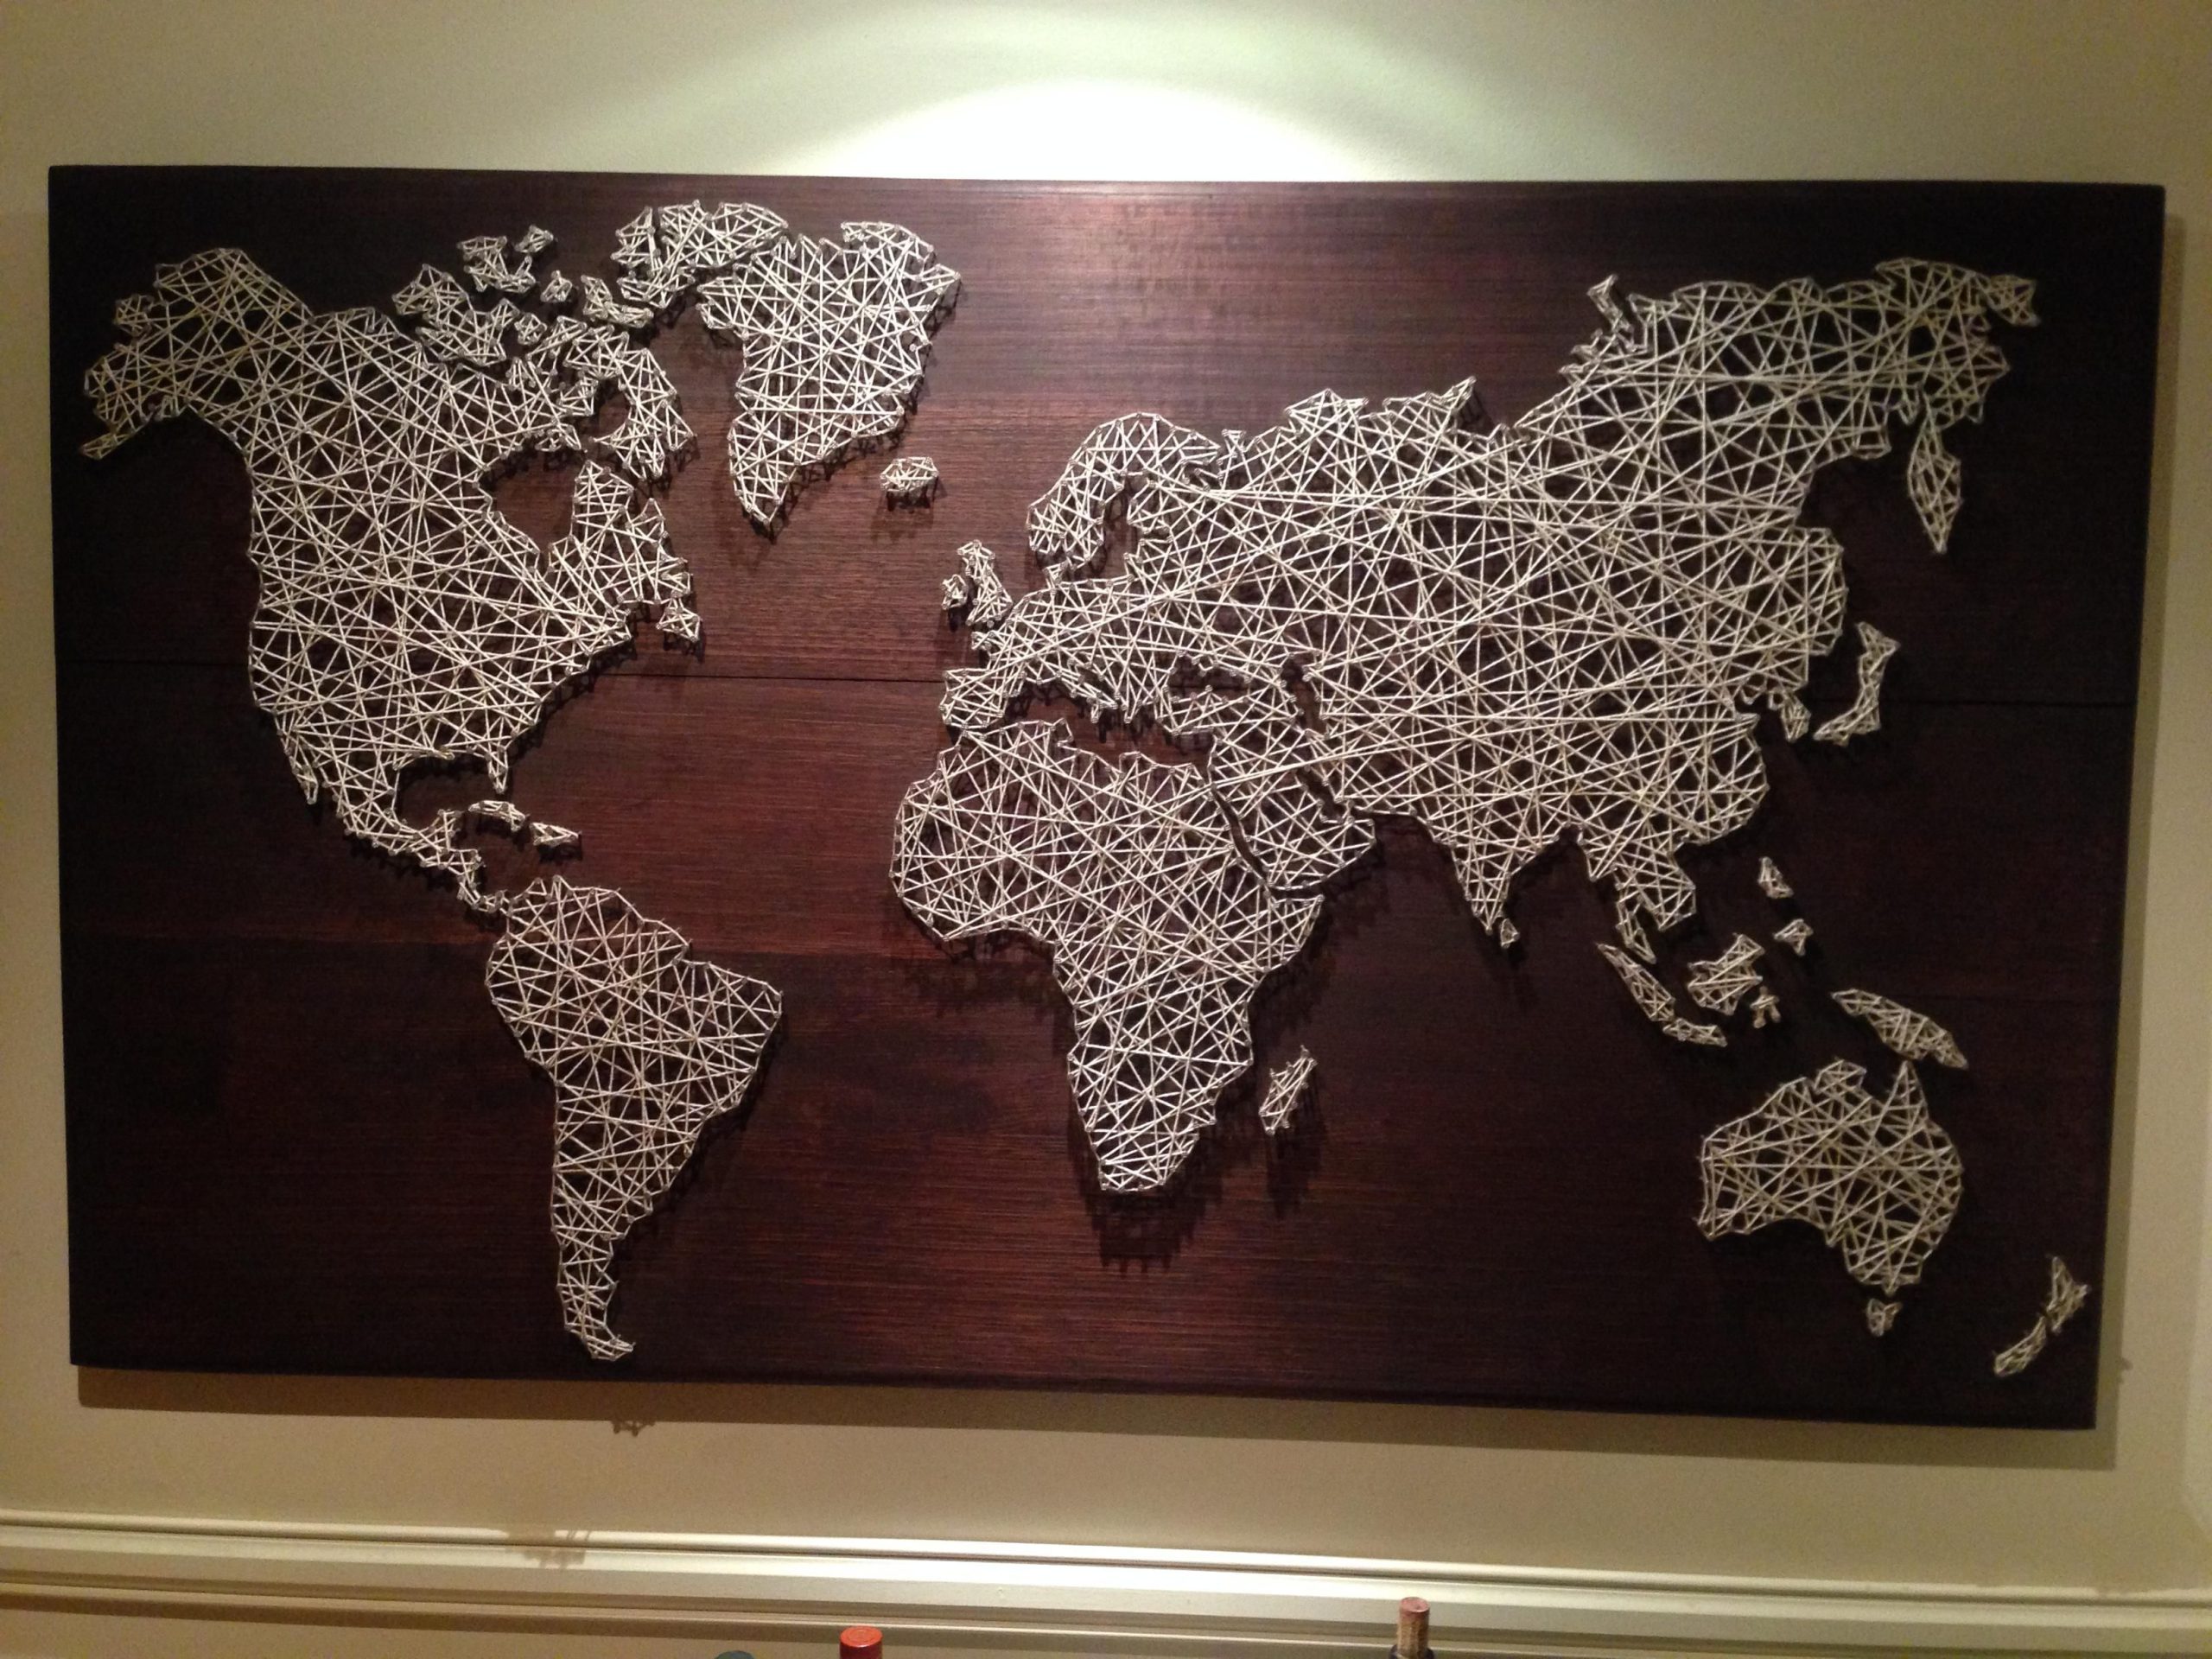 Map in String Art Concept